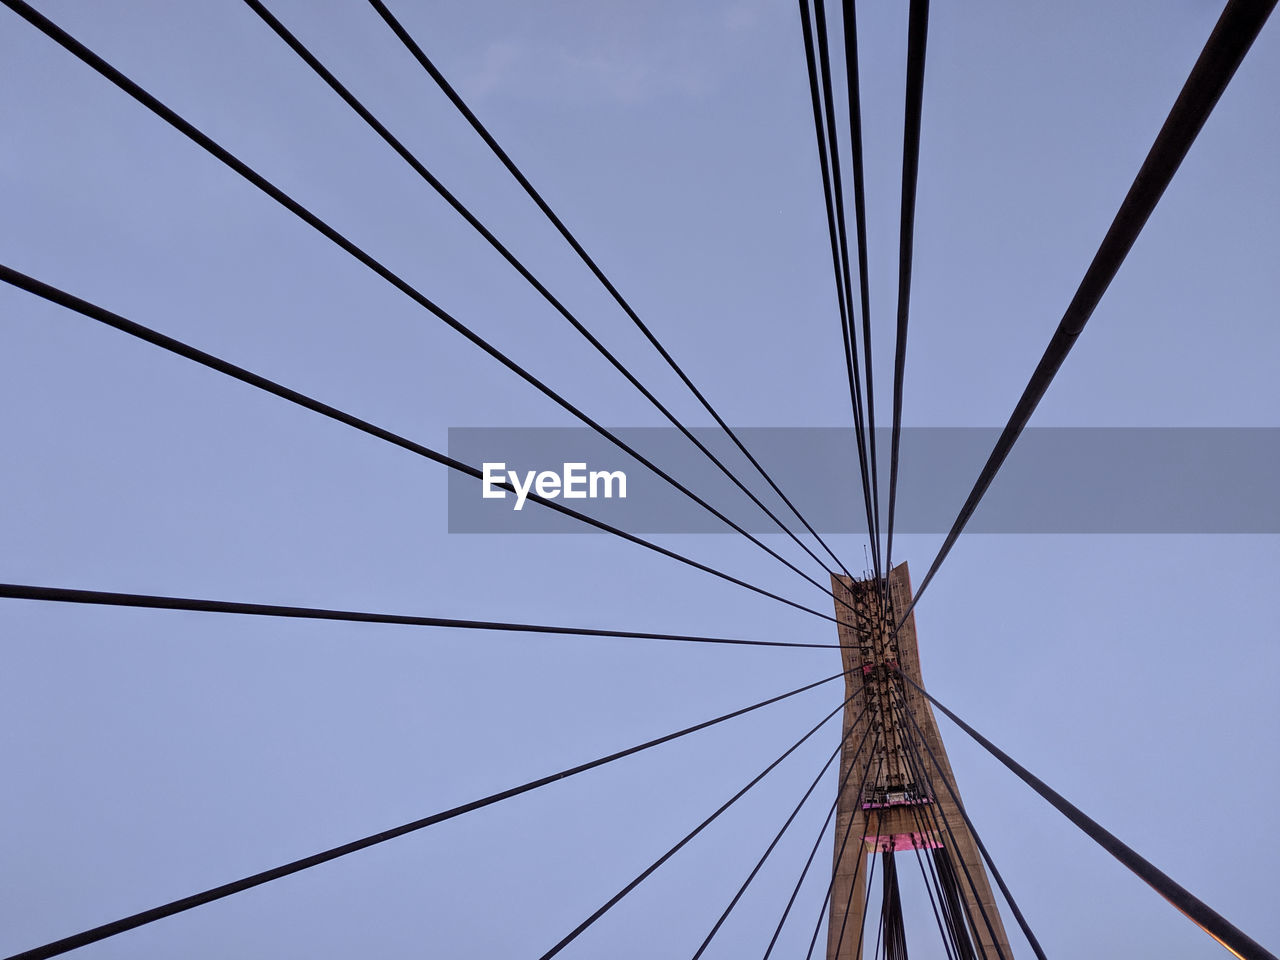 Low angle view of cables and bridge pylon against sky